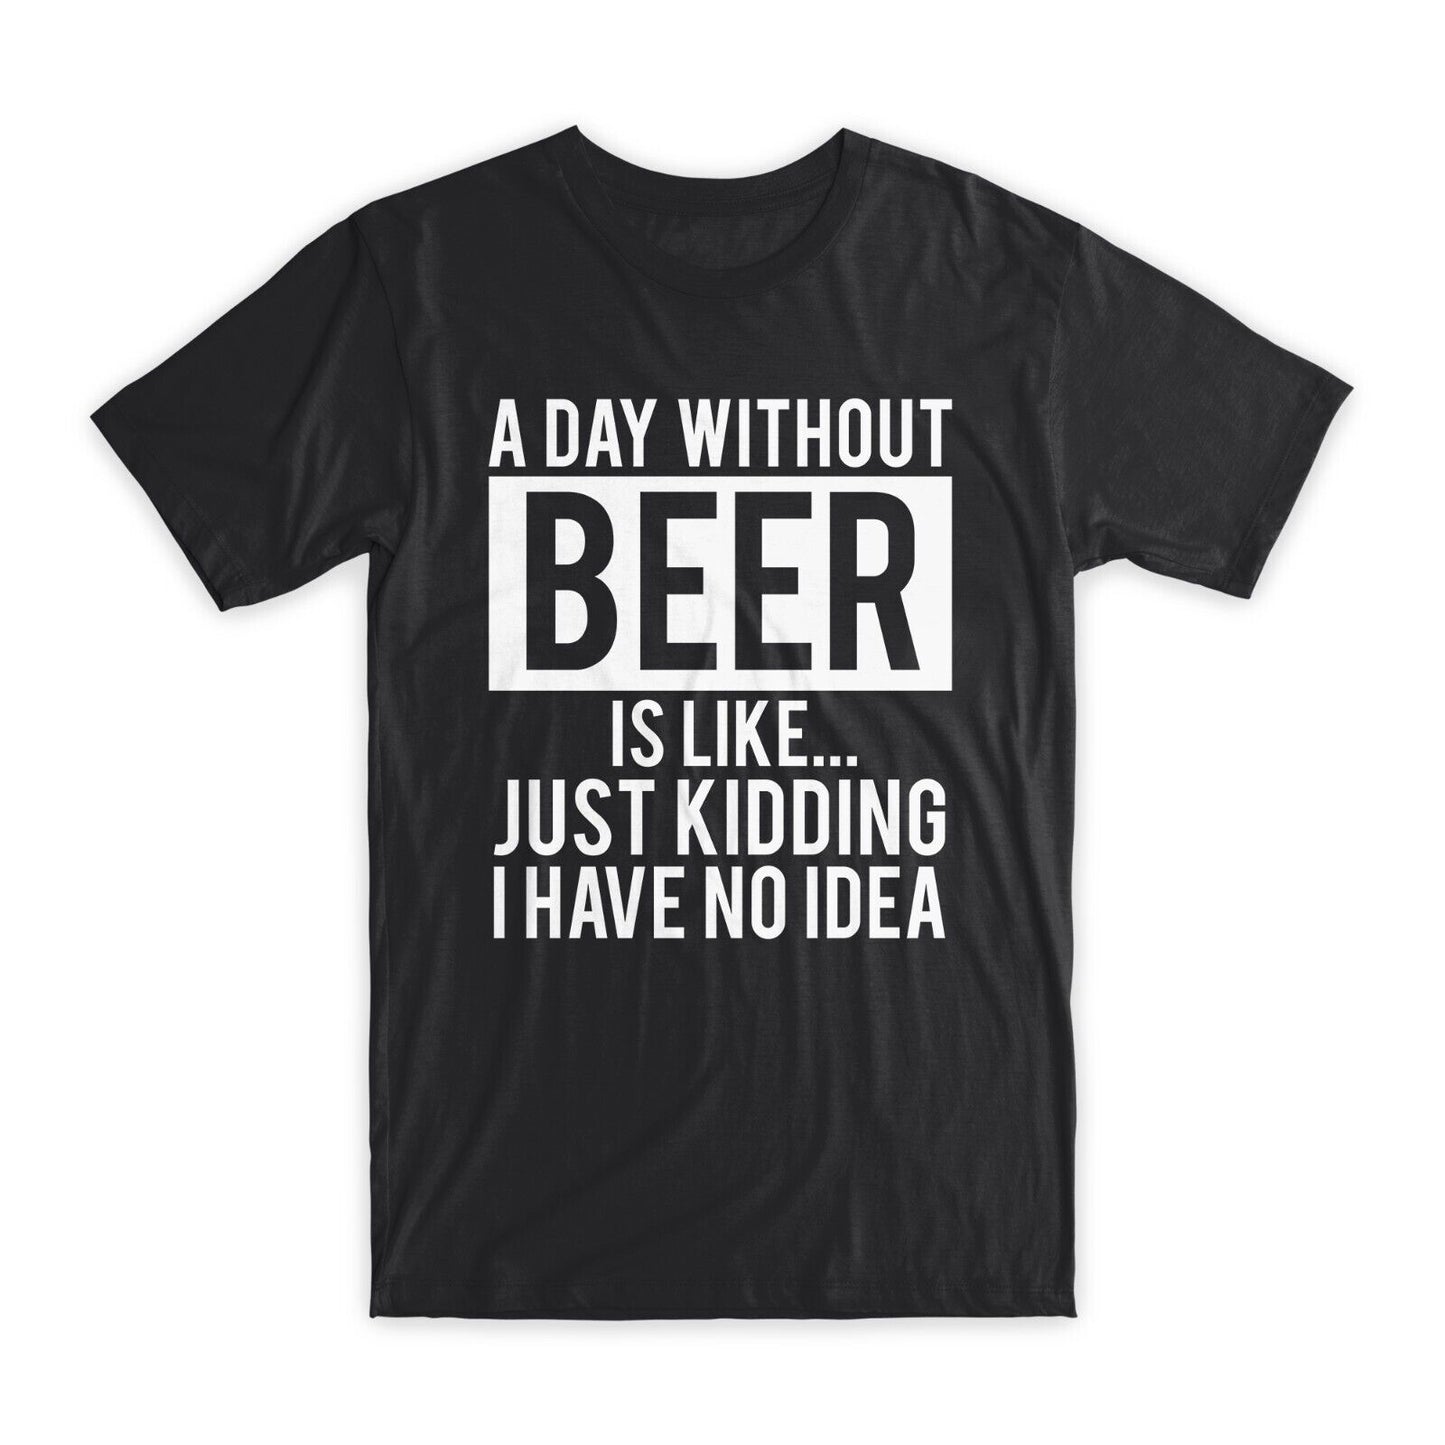 A Day Without Beer T-Shirt Funny Beer Lover Gift Cotton Tees, Black/Gray NEW